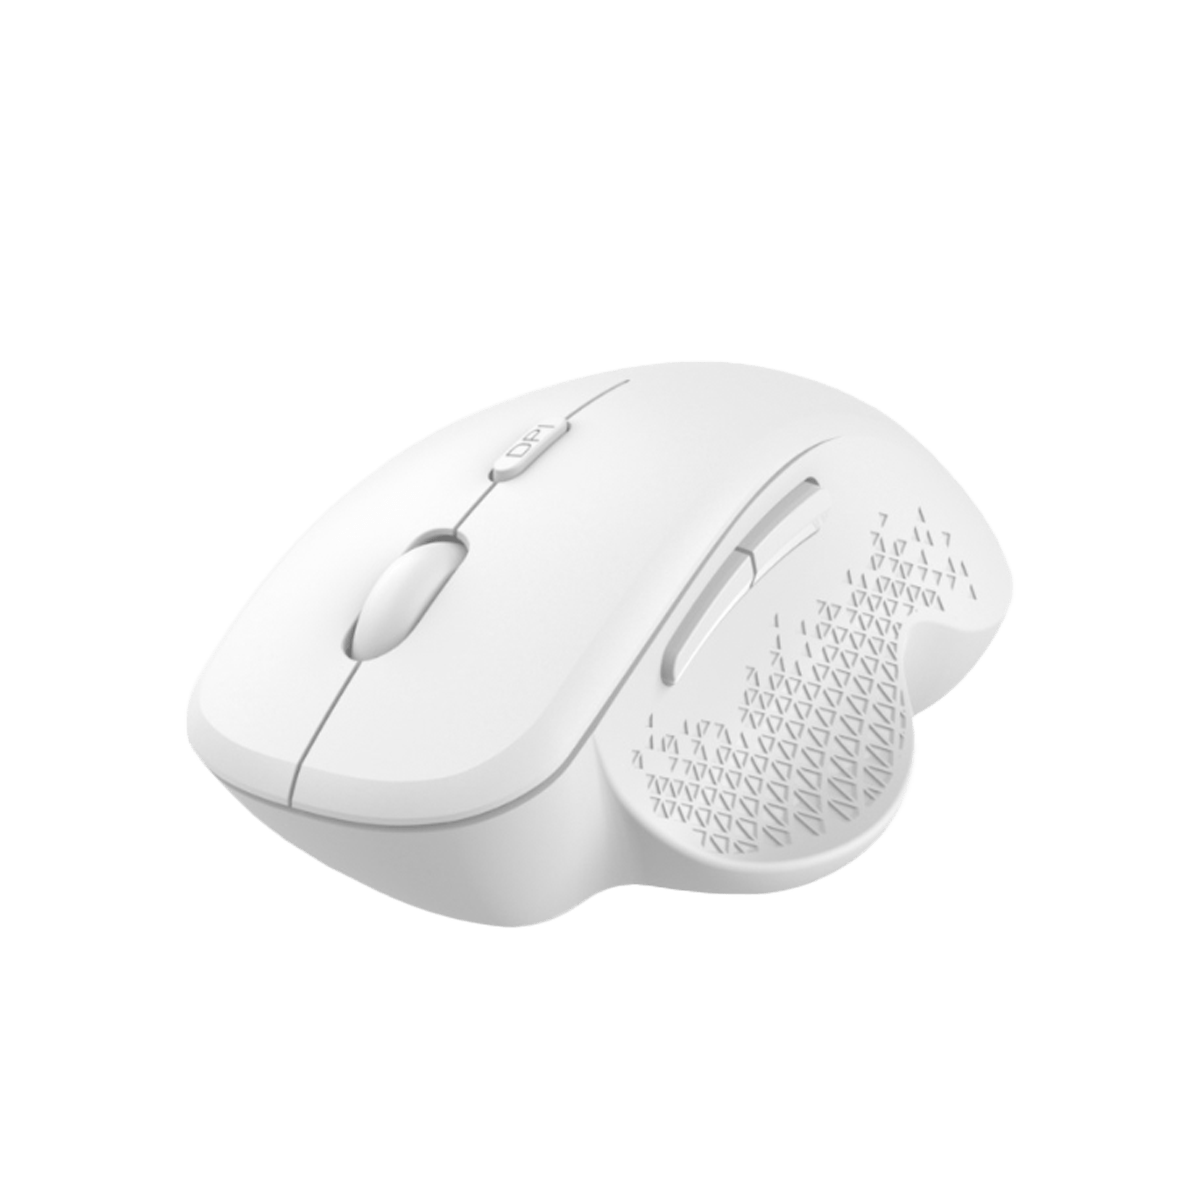 Mouse Serioux GLIDE 4